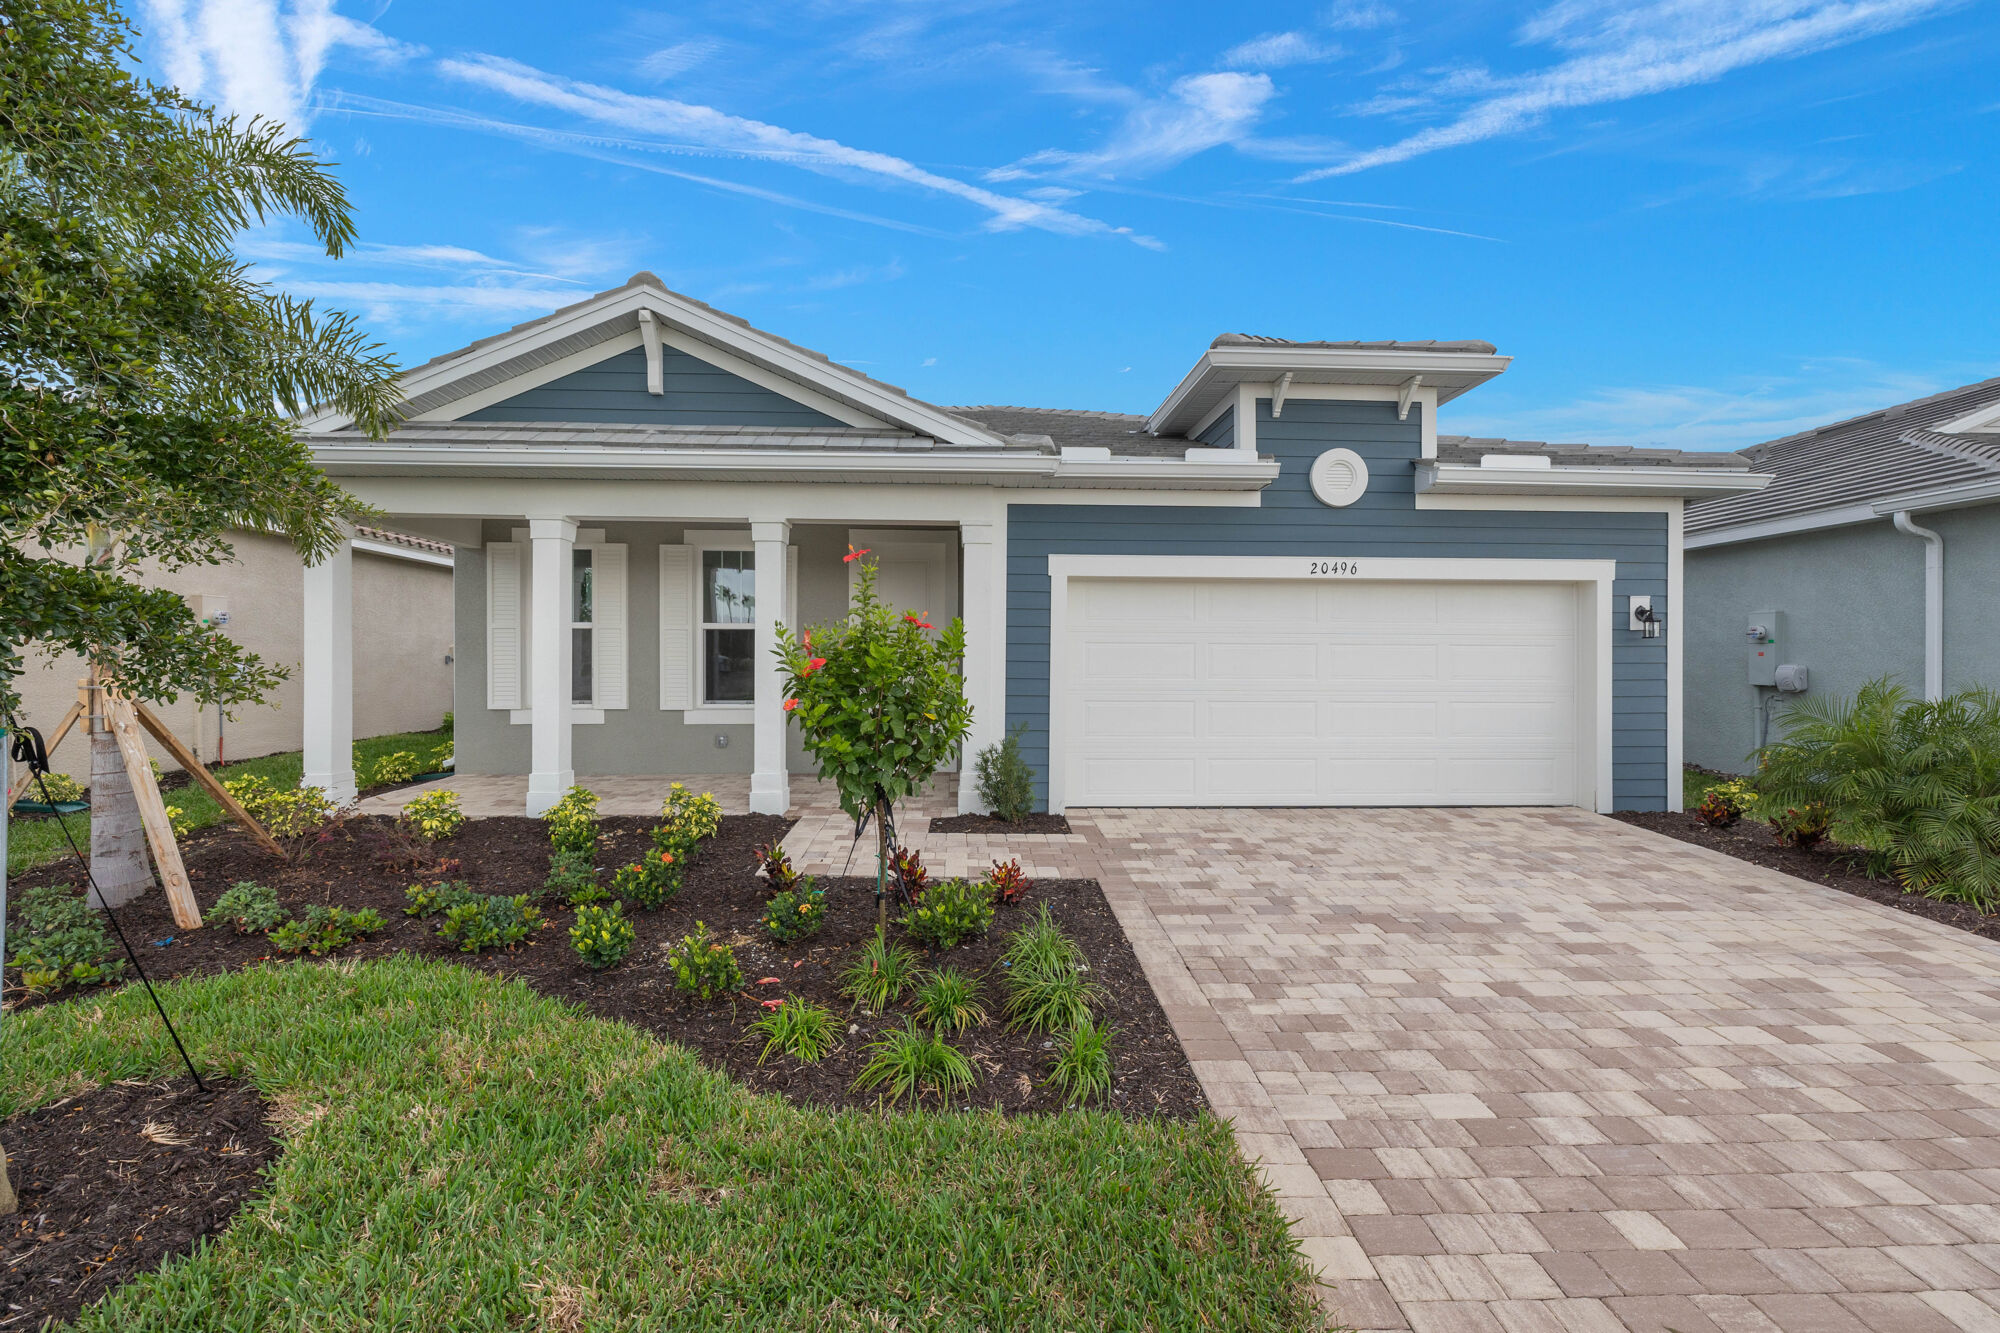 Single Story home, 3 bedrooms, 2 bathrooms, 2-car garage, study, open concept kitchen, dining and Great Room. Hideaway sliders open up onto the Lanai from the Great Room. Walk-in closet, linen closet in Owner's ensuite. Luxury Vinyl Plank flooring, 